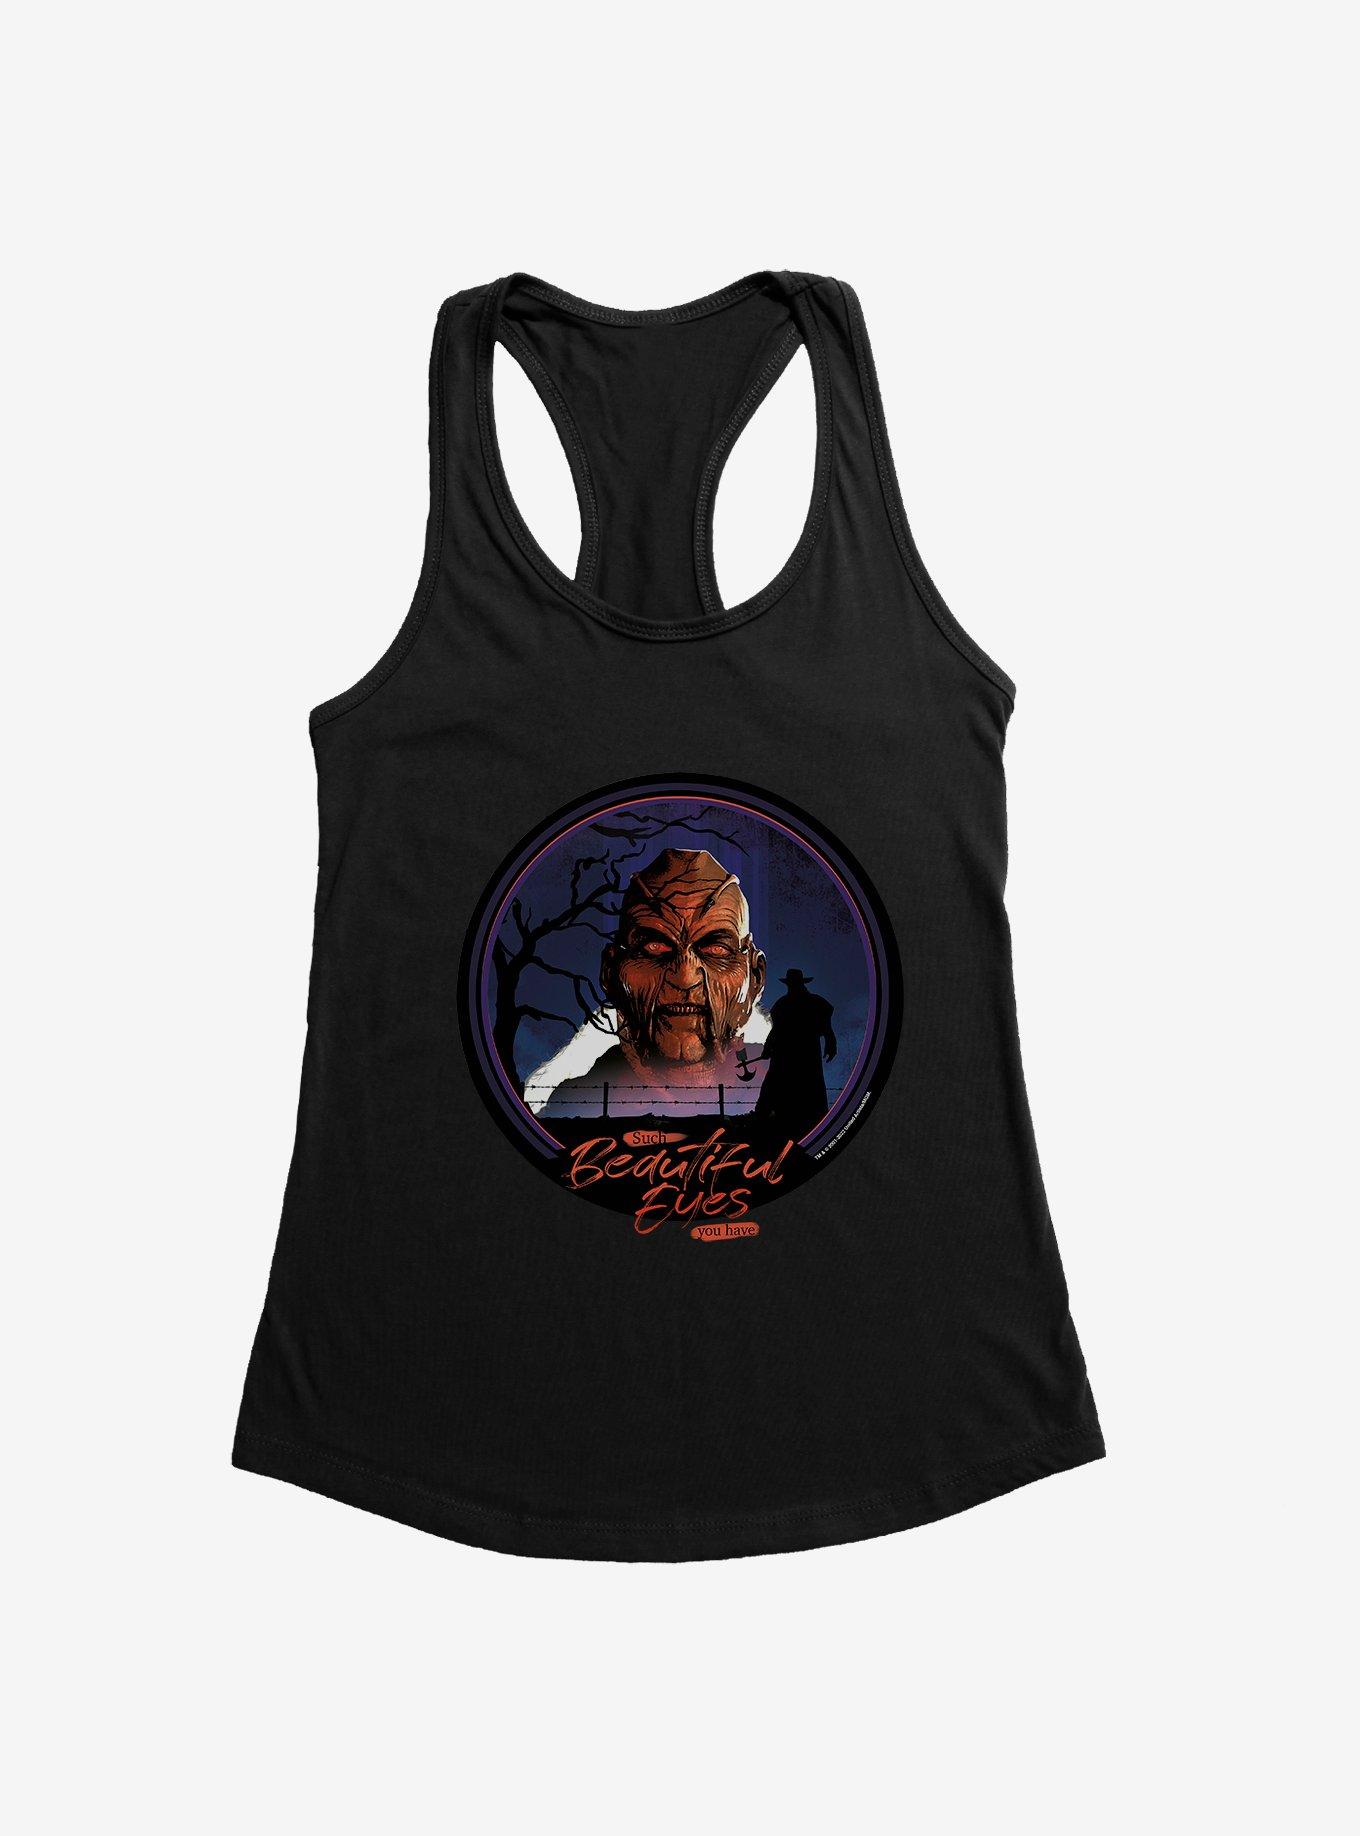 Jeepers Creepers Such Beautiful Eyes Womens Tank Top, BLACK, hi-res